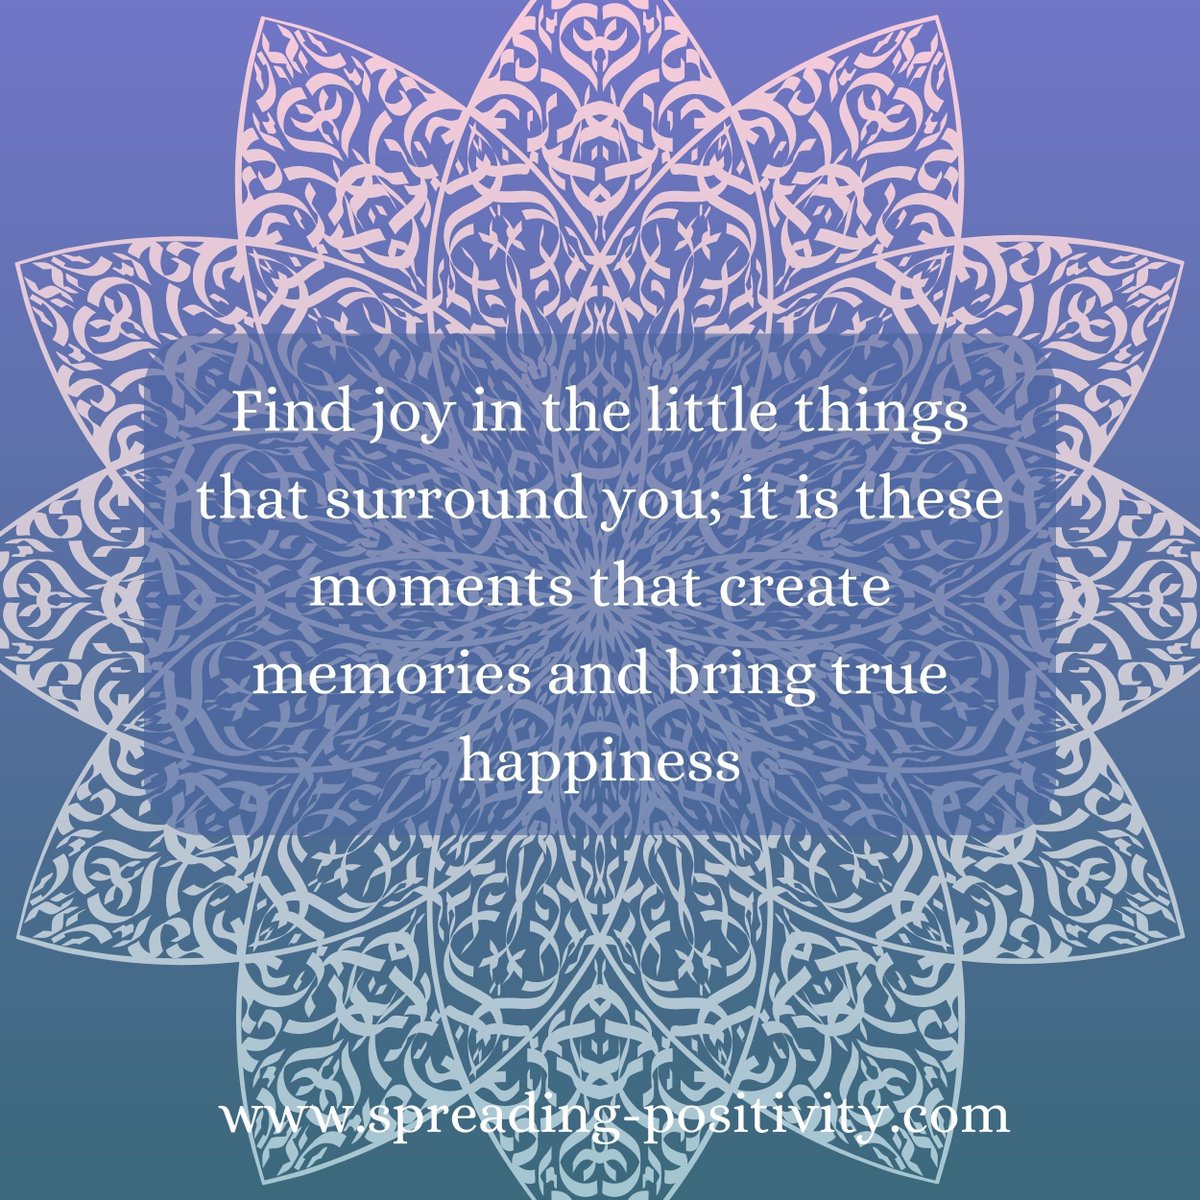 When we take time to appreciate these little joys, we cultivate happiness and positivity in our lives. Today, let's celebrate the power of positivity and the strength it brings to our lives. 💪💛

#SpreadPositivity #FindJoyInTheLittleThings #HappinessIsAChoice #ShareYourStory